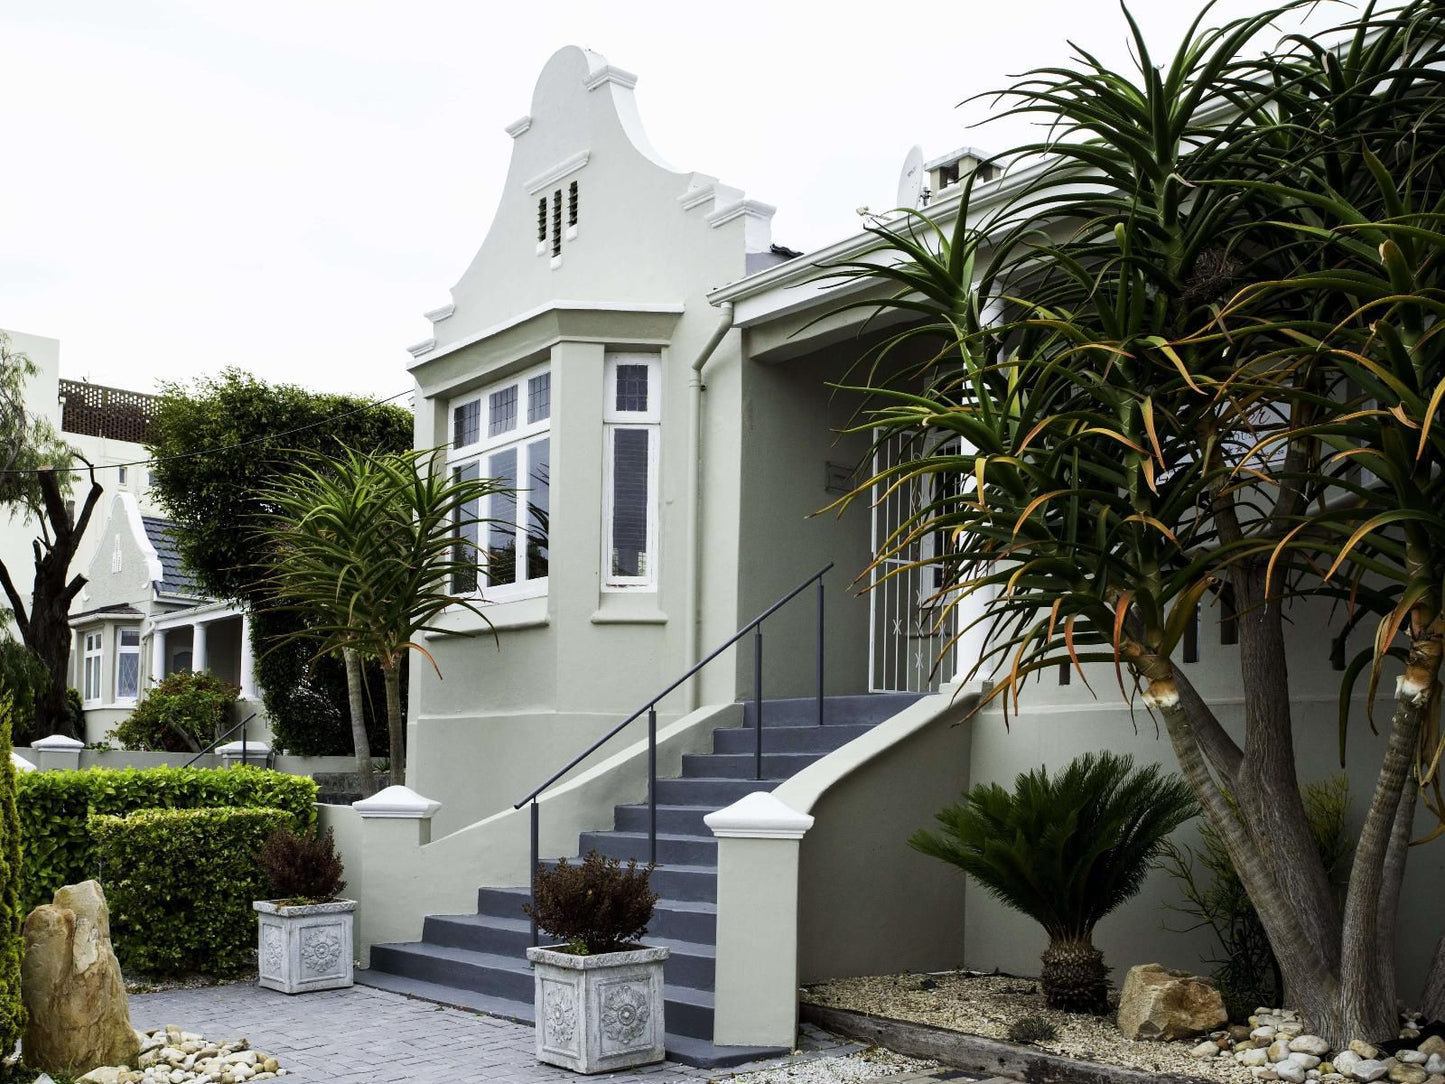 Conifer Beach House Humewood Port Elizabeth Eastern Cape South Africa Building, Architecture, House